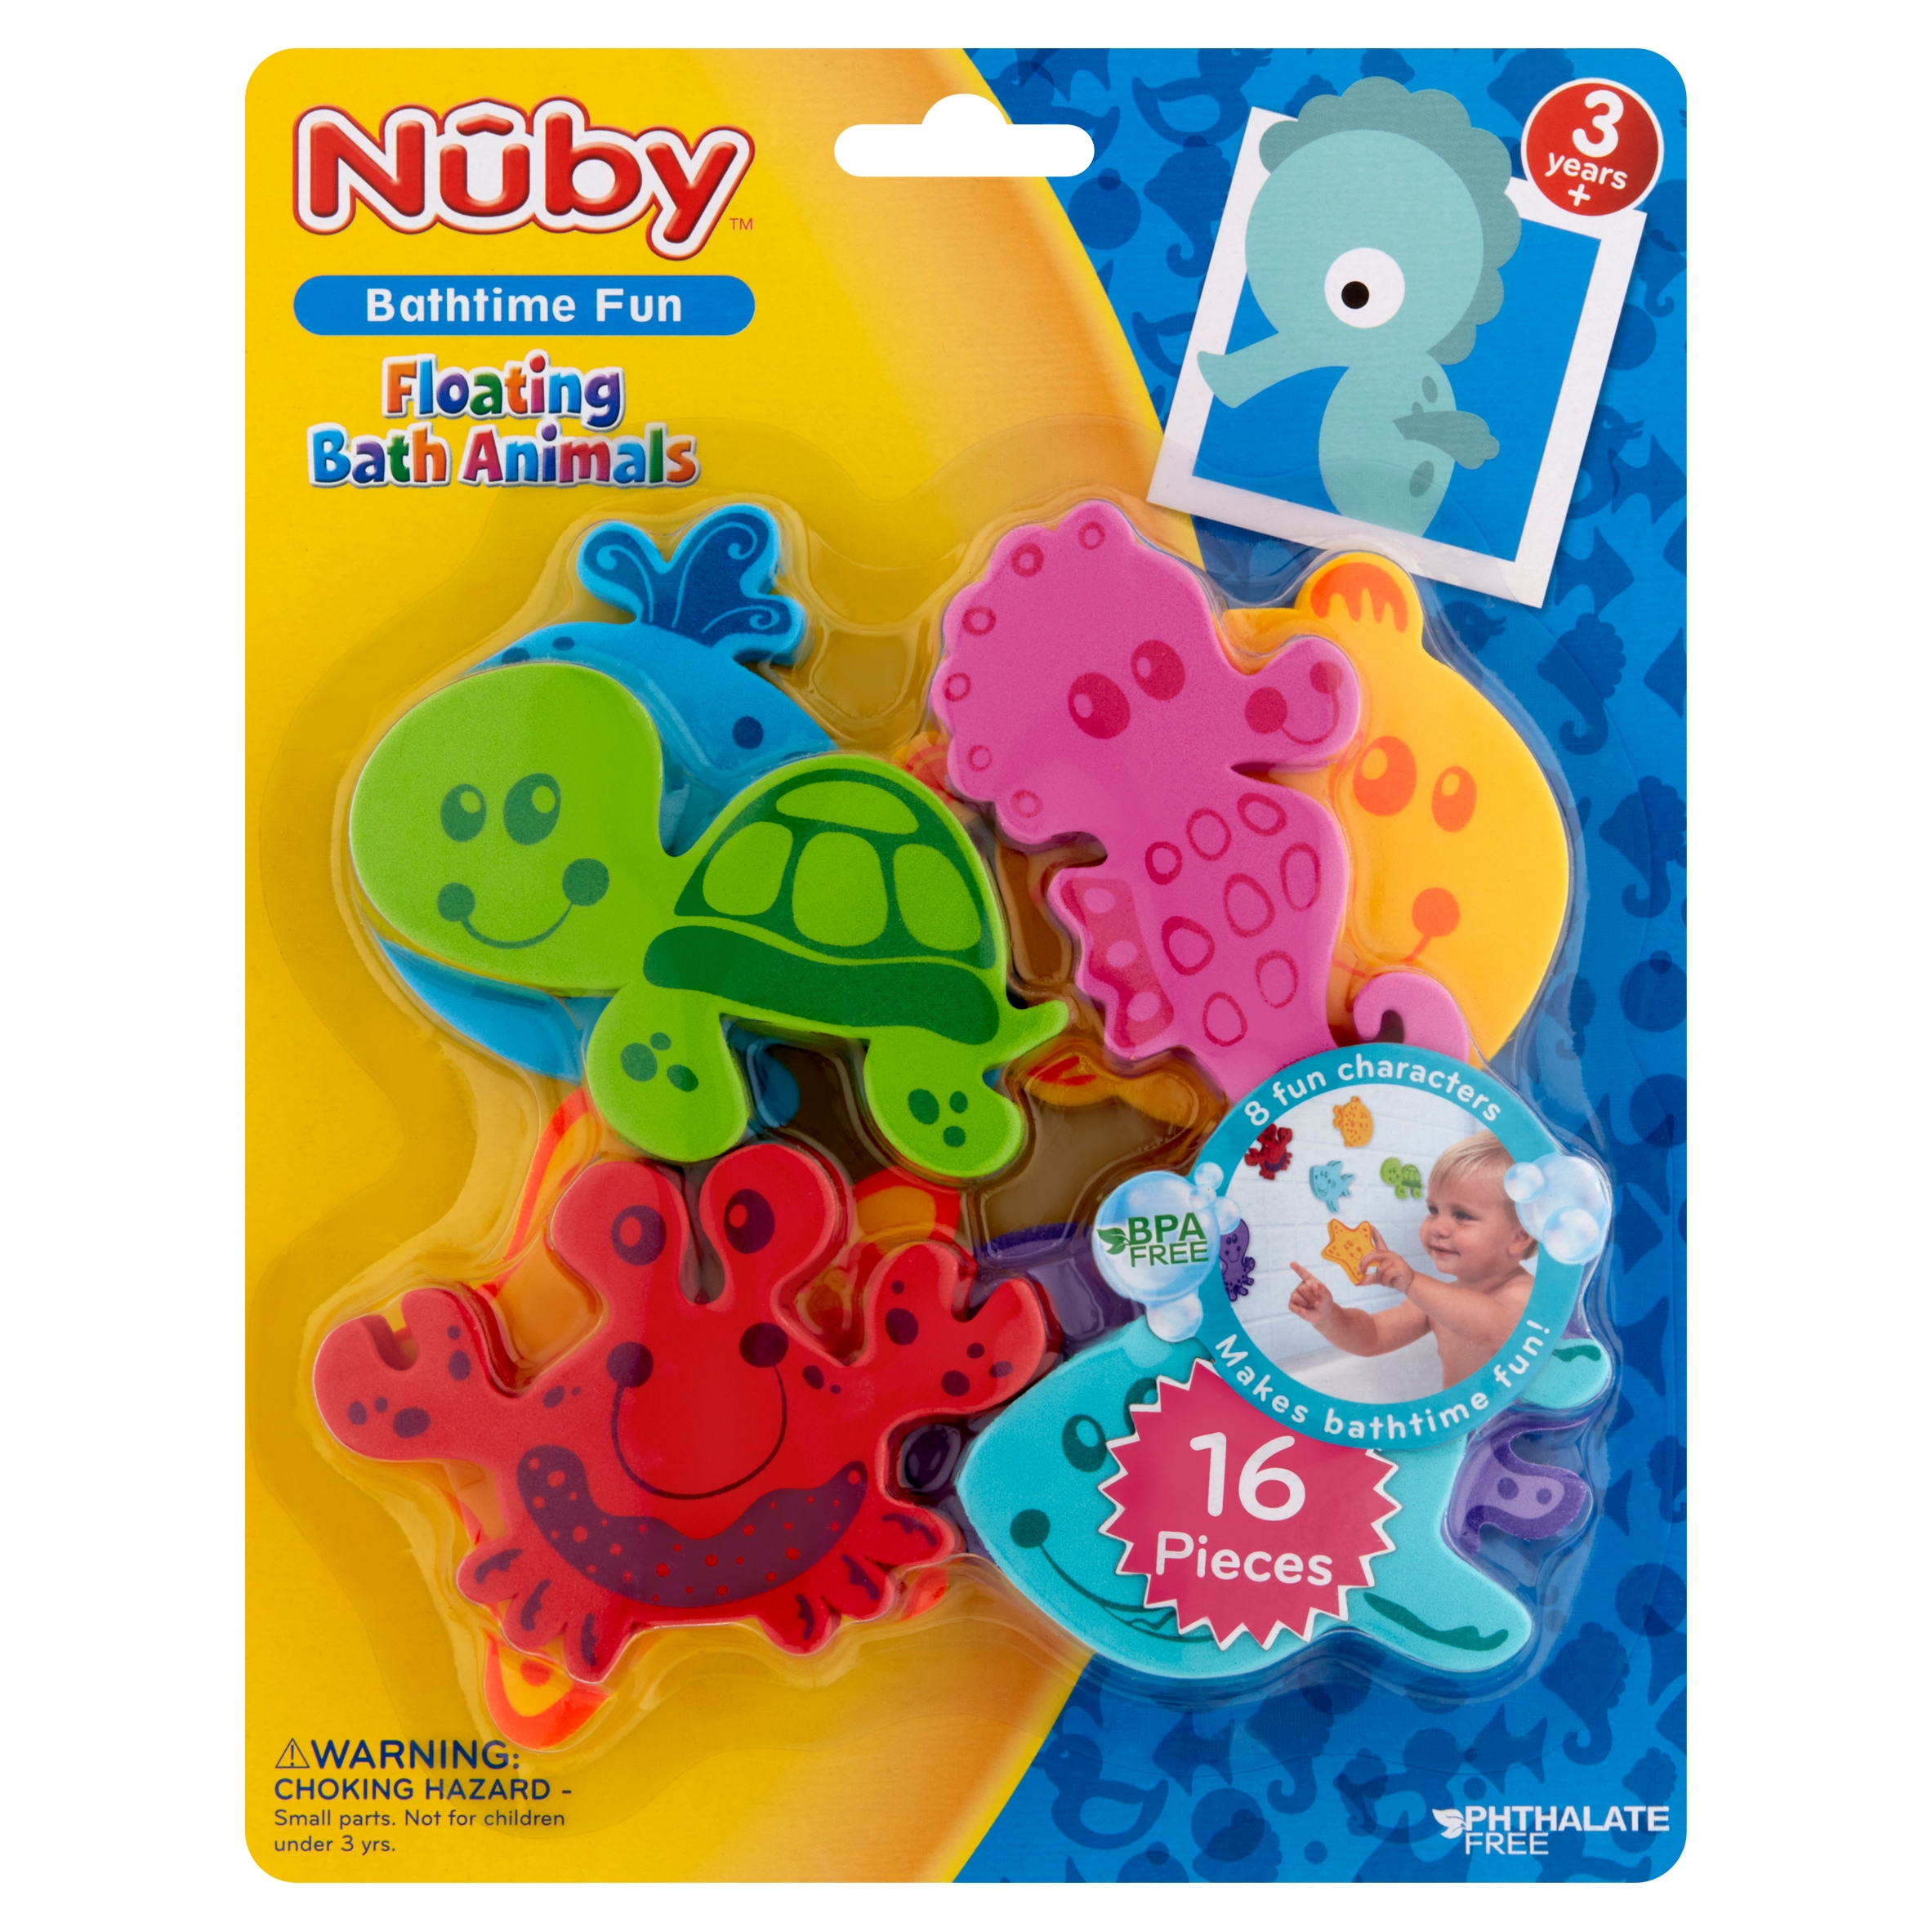 Nûby Floating Bath Animals, 3 years+, 16 count - image 2 of 5